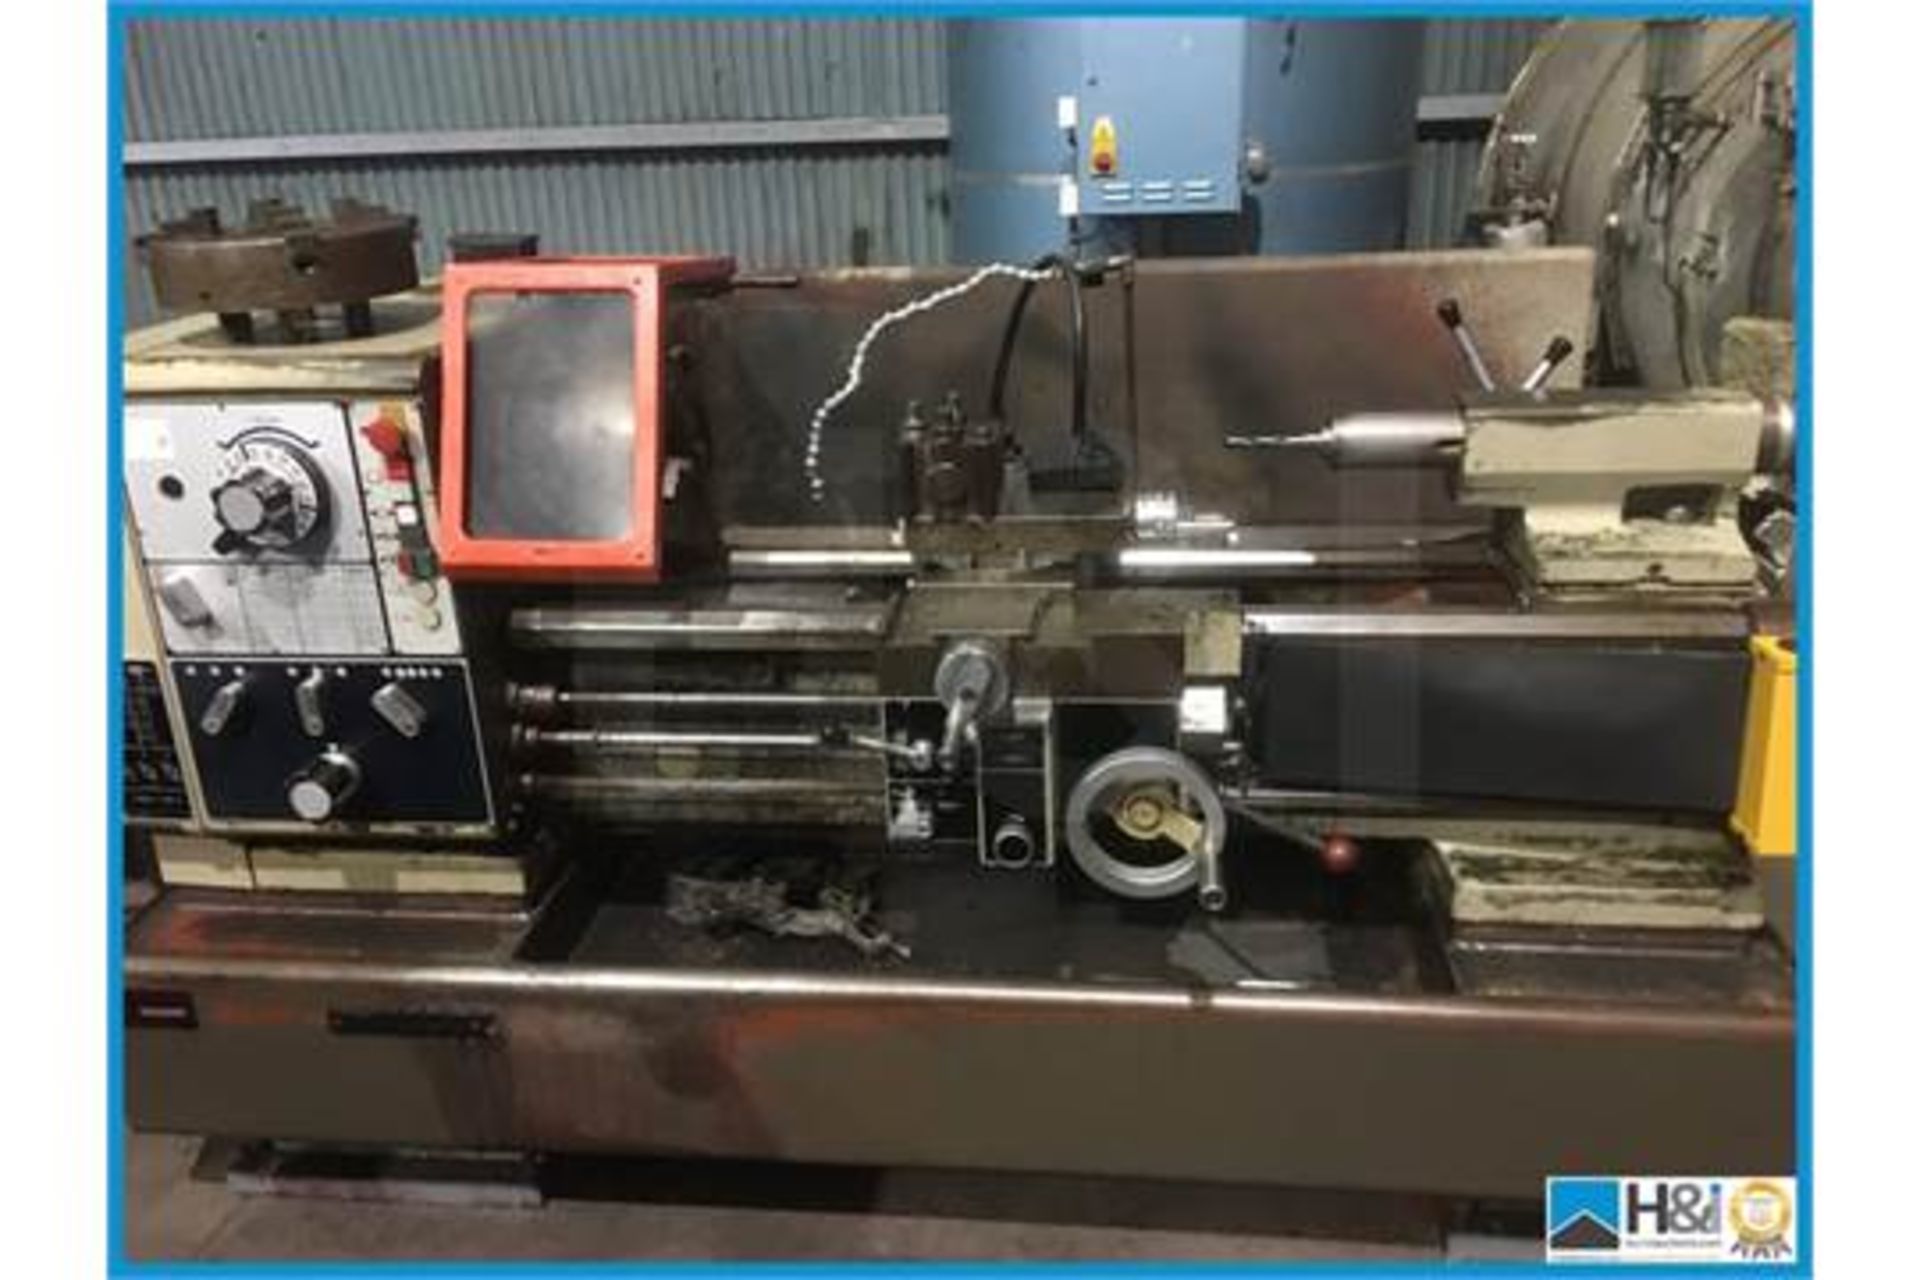 Harrison M400 gap bed lathe with various tooling, chucks etc superb condition Appraisal: Viewing